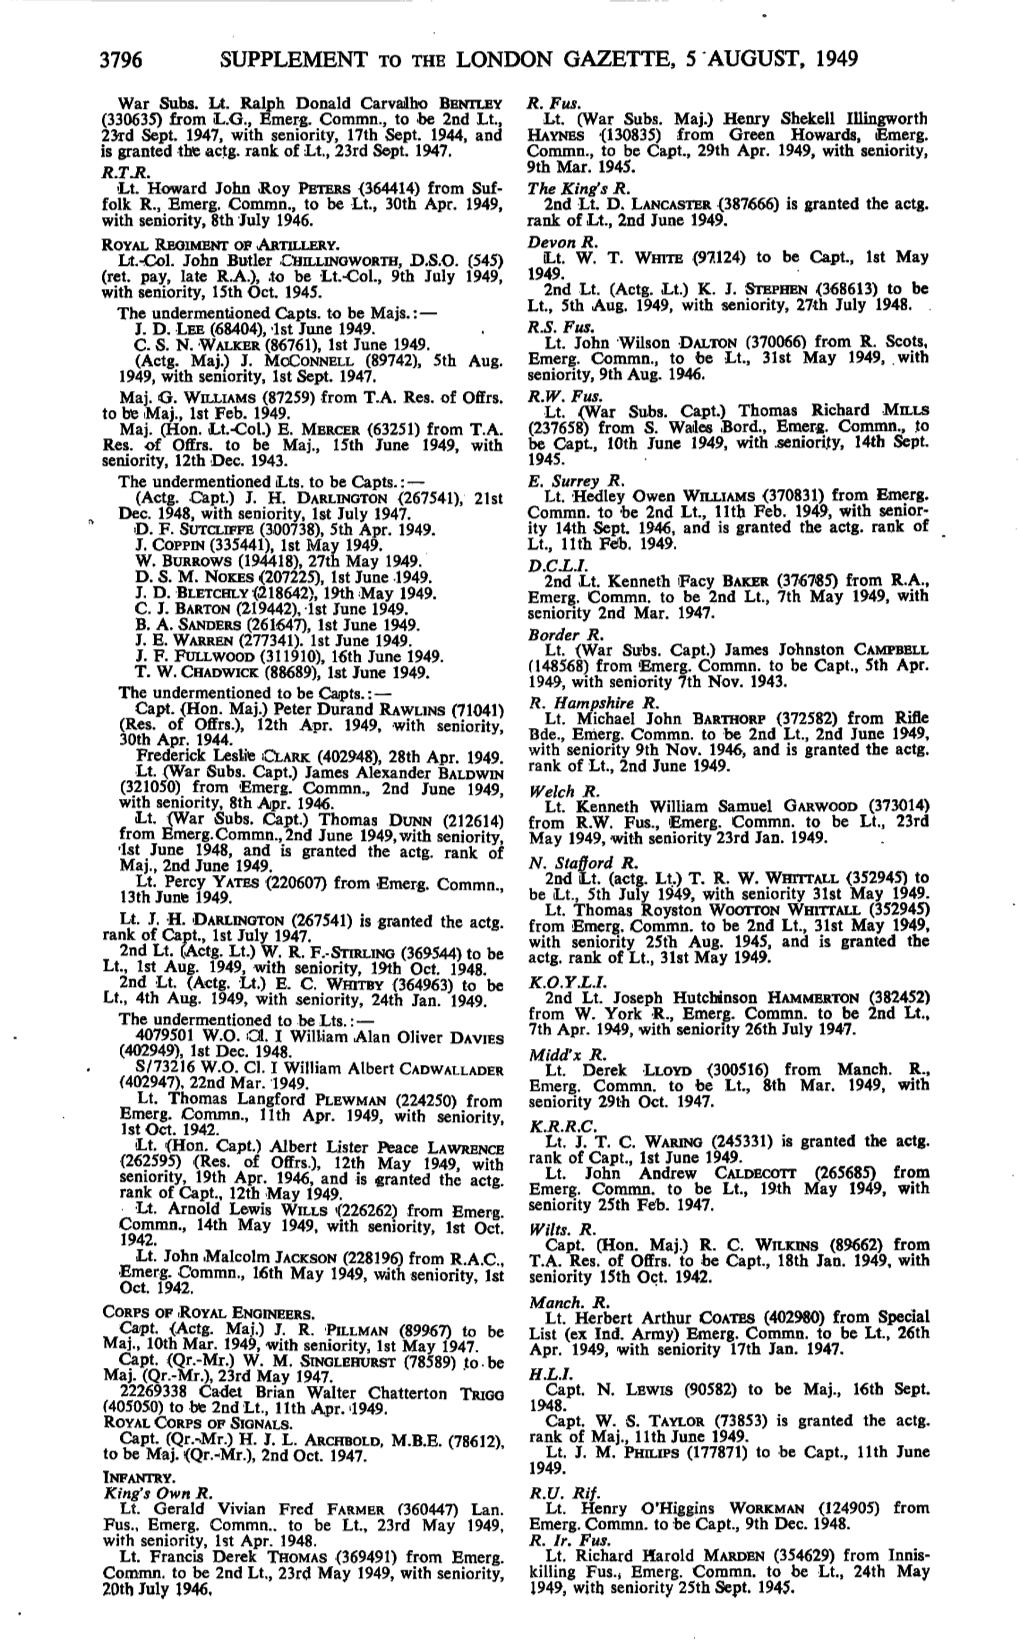 3796 Supplement to the London Gazette, 5 August, 1949